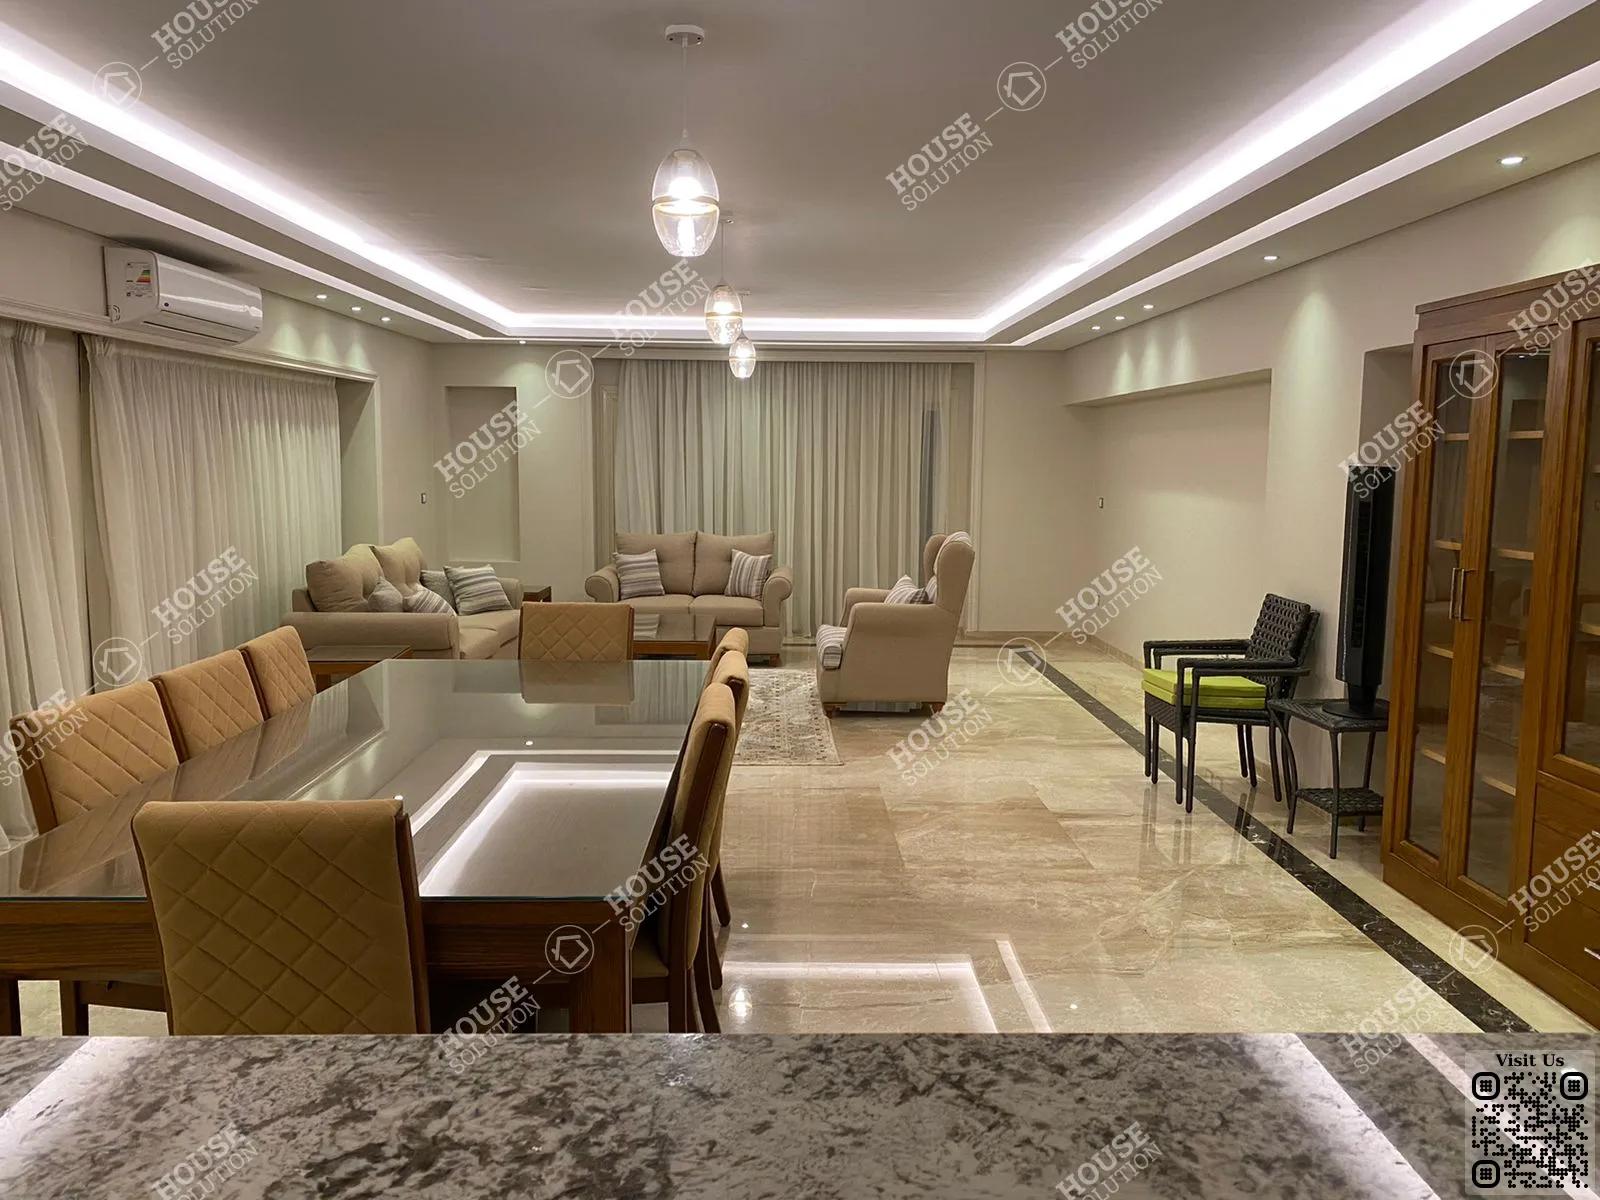 RECEPTION  @ Apartments For Rent In Maadi Maadi Sarayat Area: 240 m² consists of 3 Bedrooms 3 Bathrooms Modern furnished 5 stars #5566-1